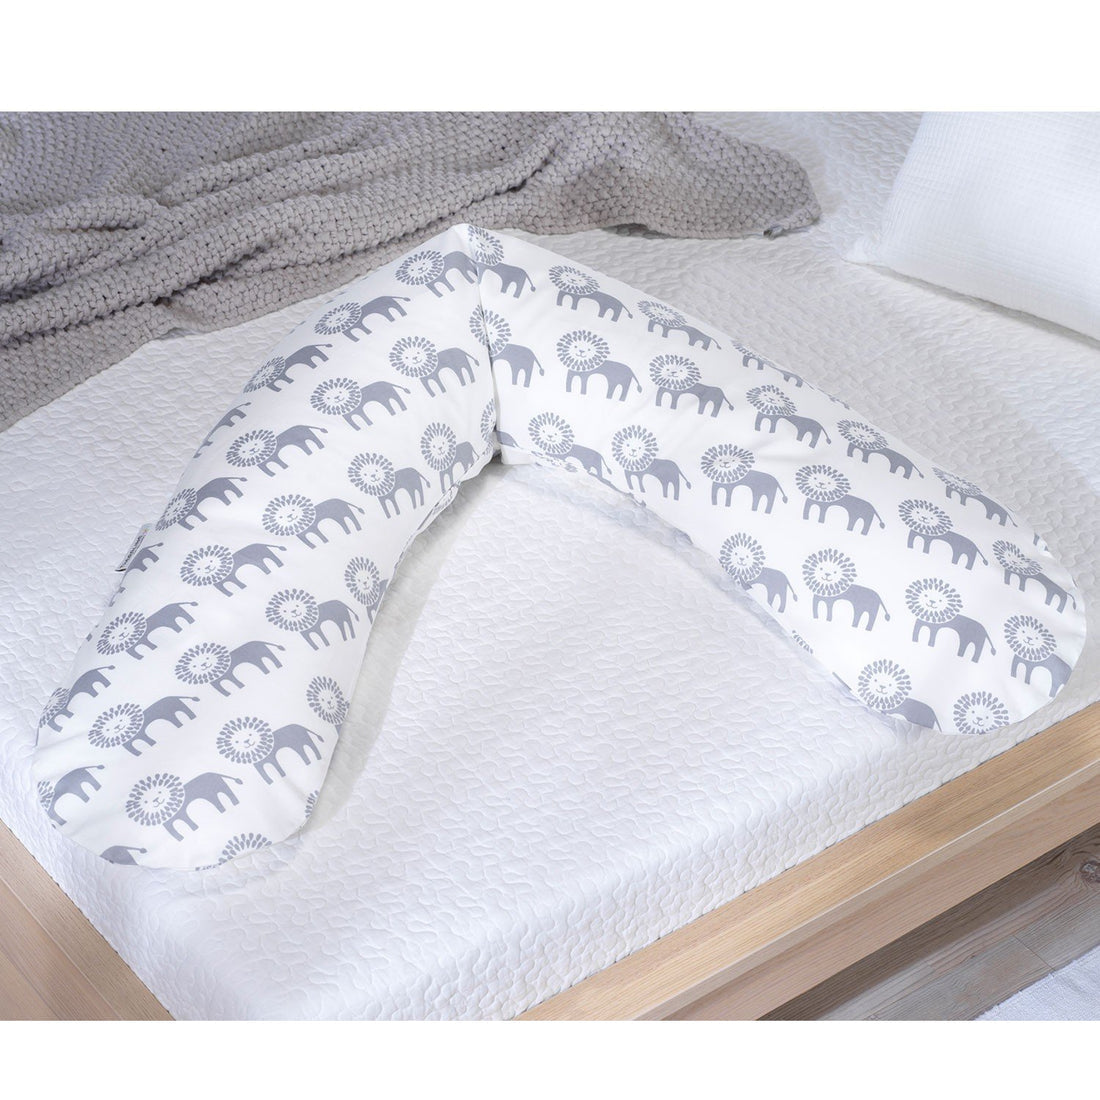 Maternity and nursing pillow - White (grey lions print)